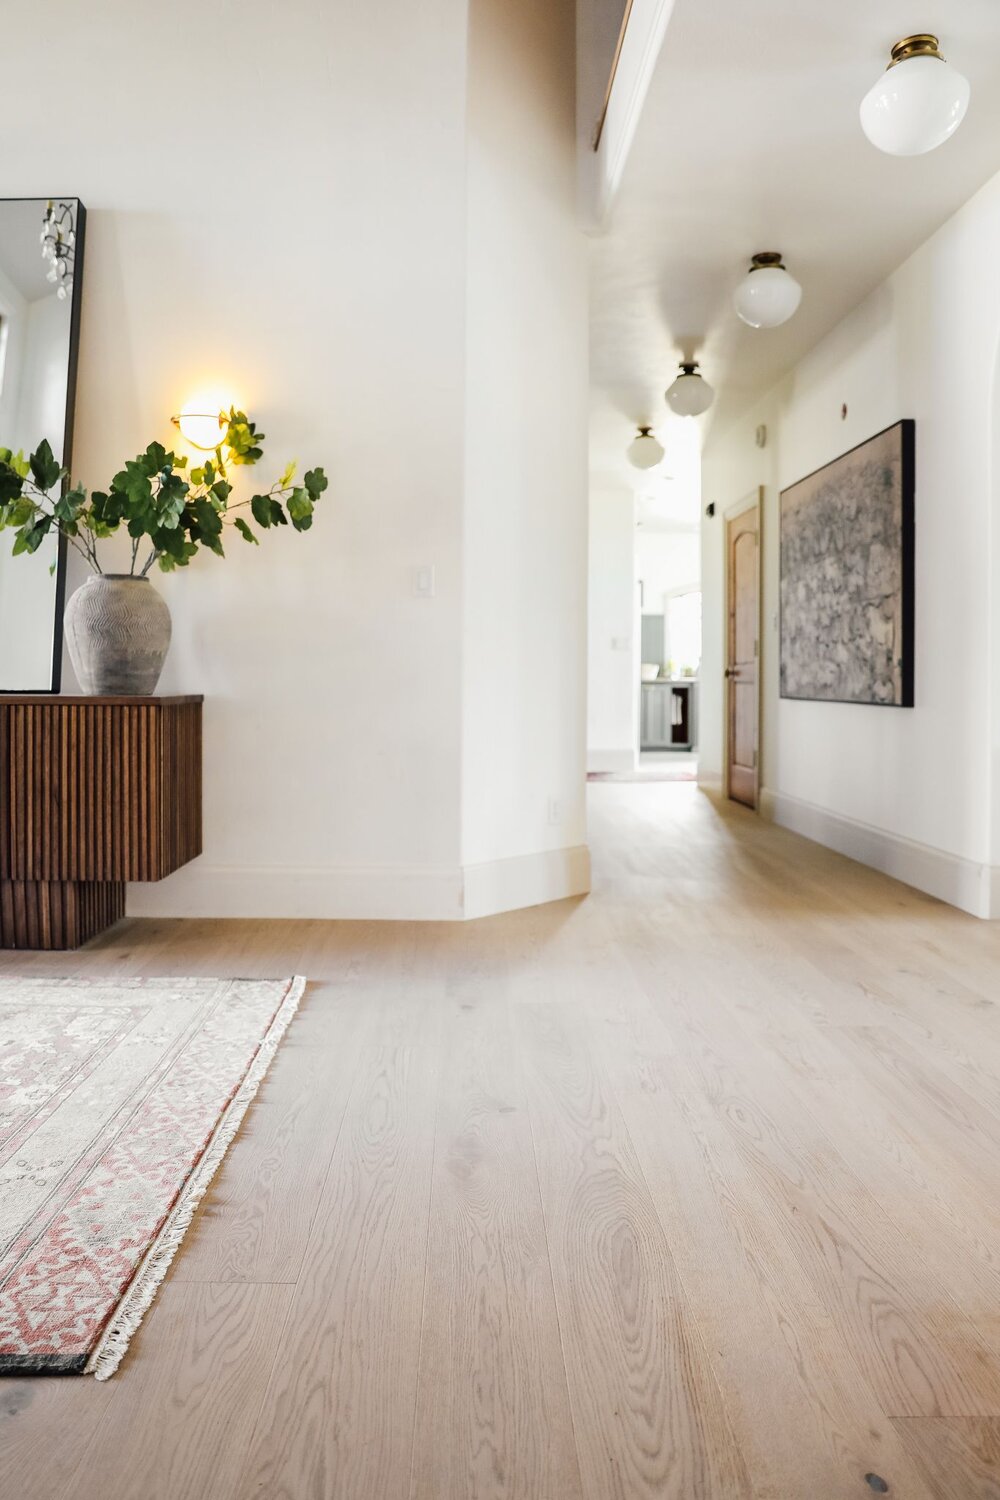 All about The New Wood Flooring throughout Our House!.jpg